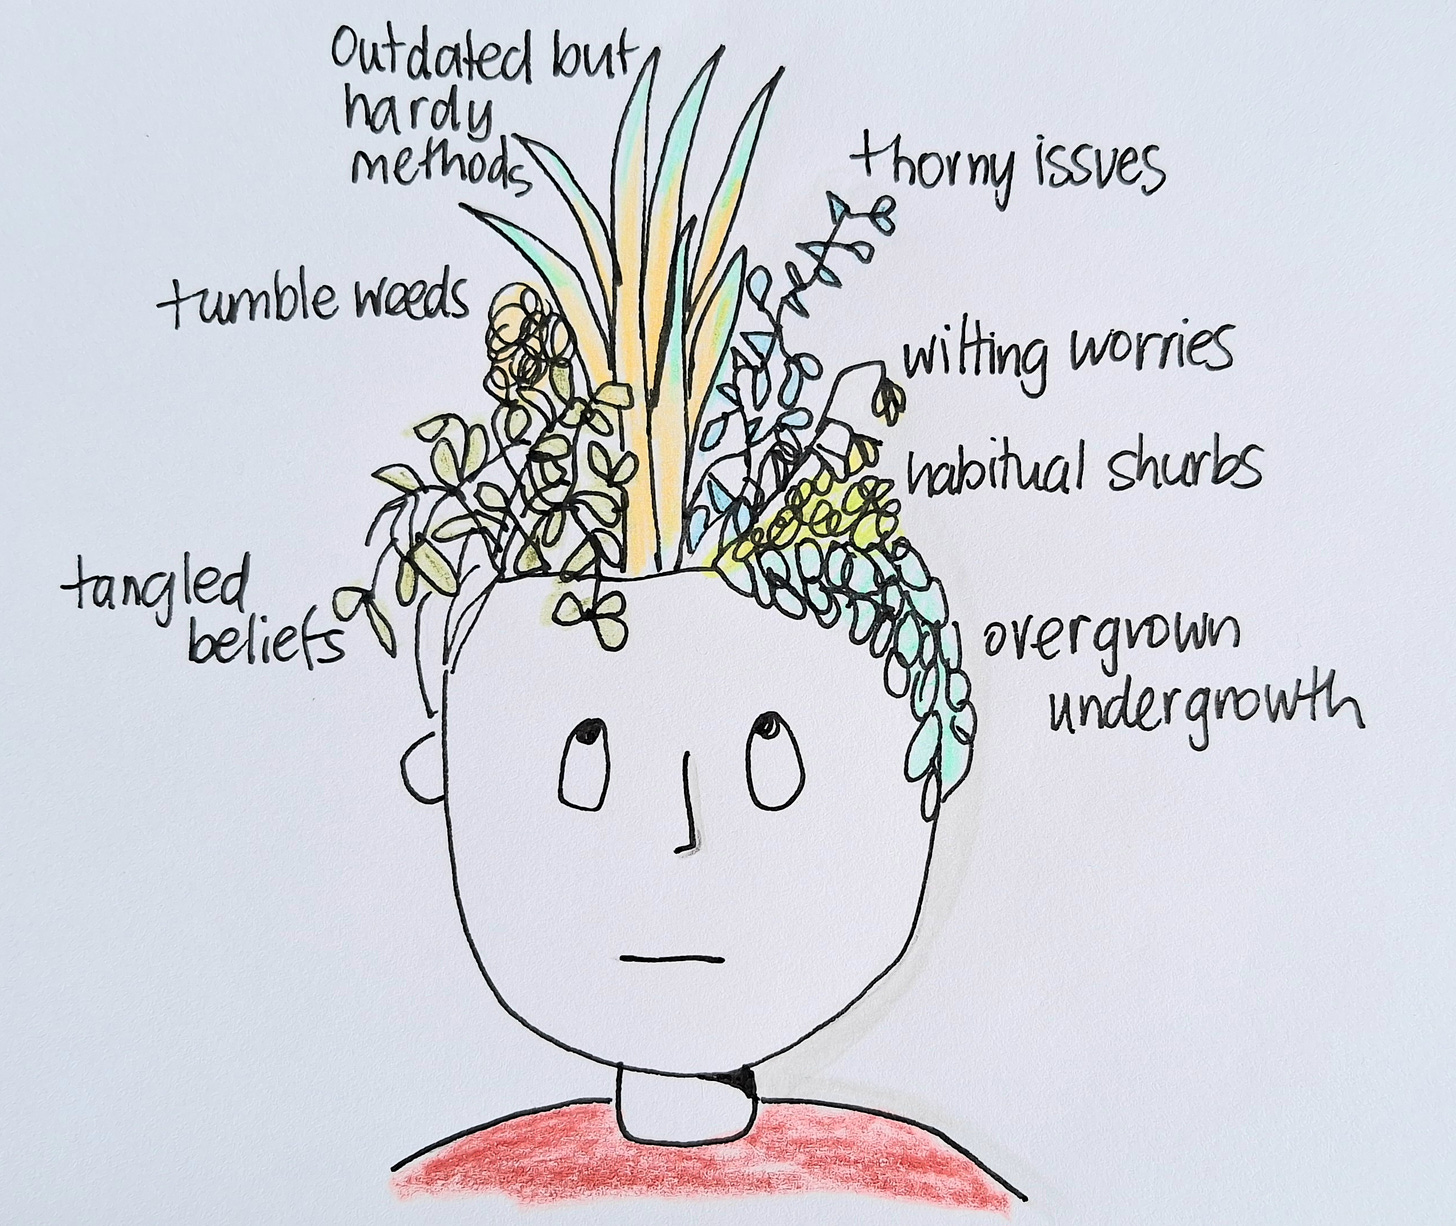 Cartoon of a tangled garden of weeds growing out of the top of a person's head.